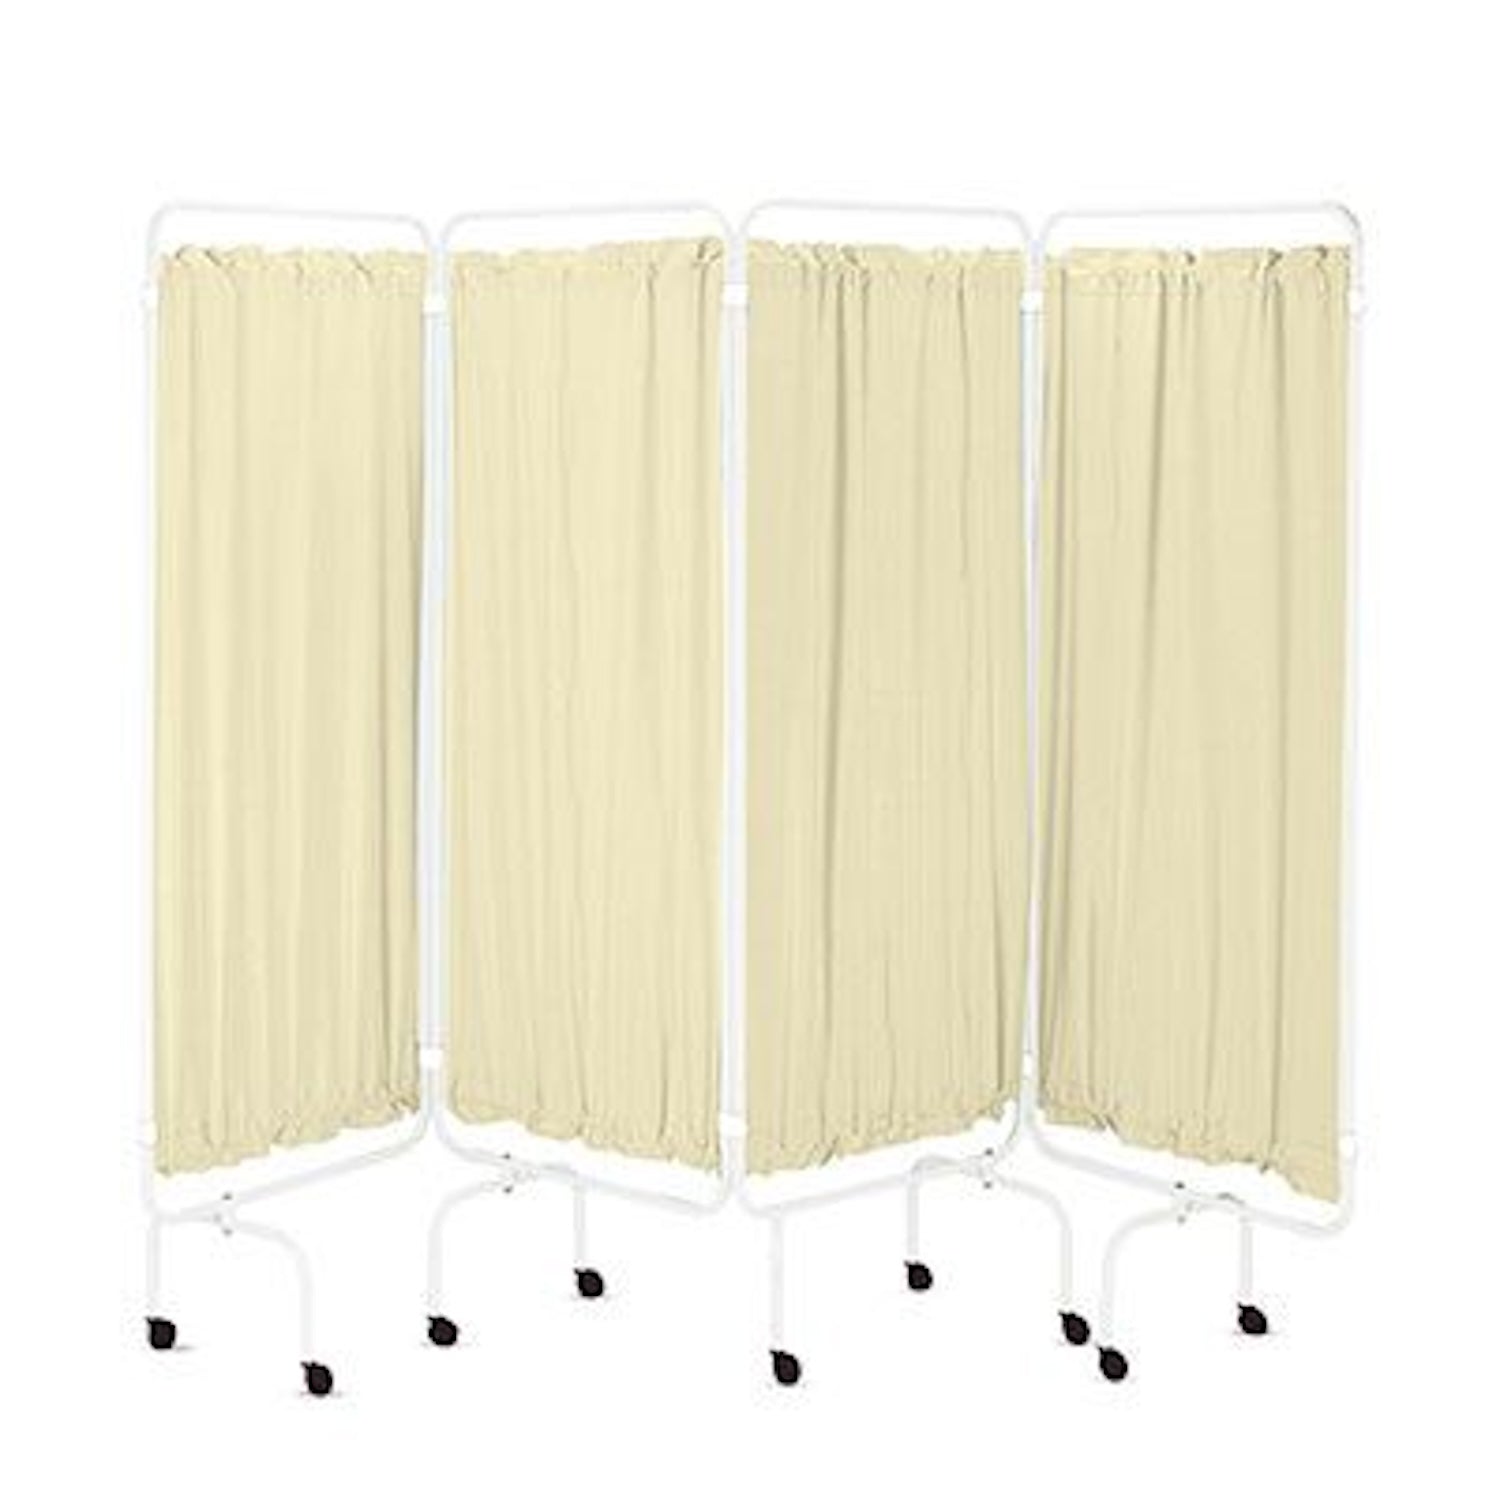 Polyester Curtains For Doherty Ward Screens | Set of 4